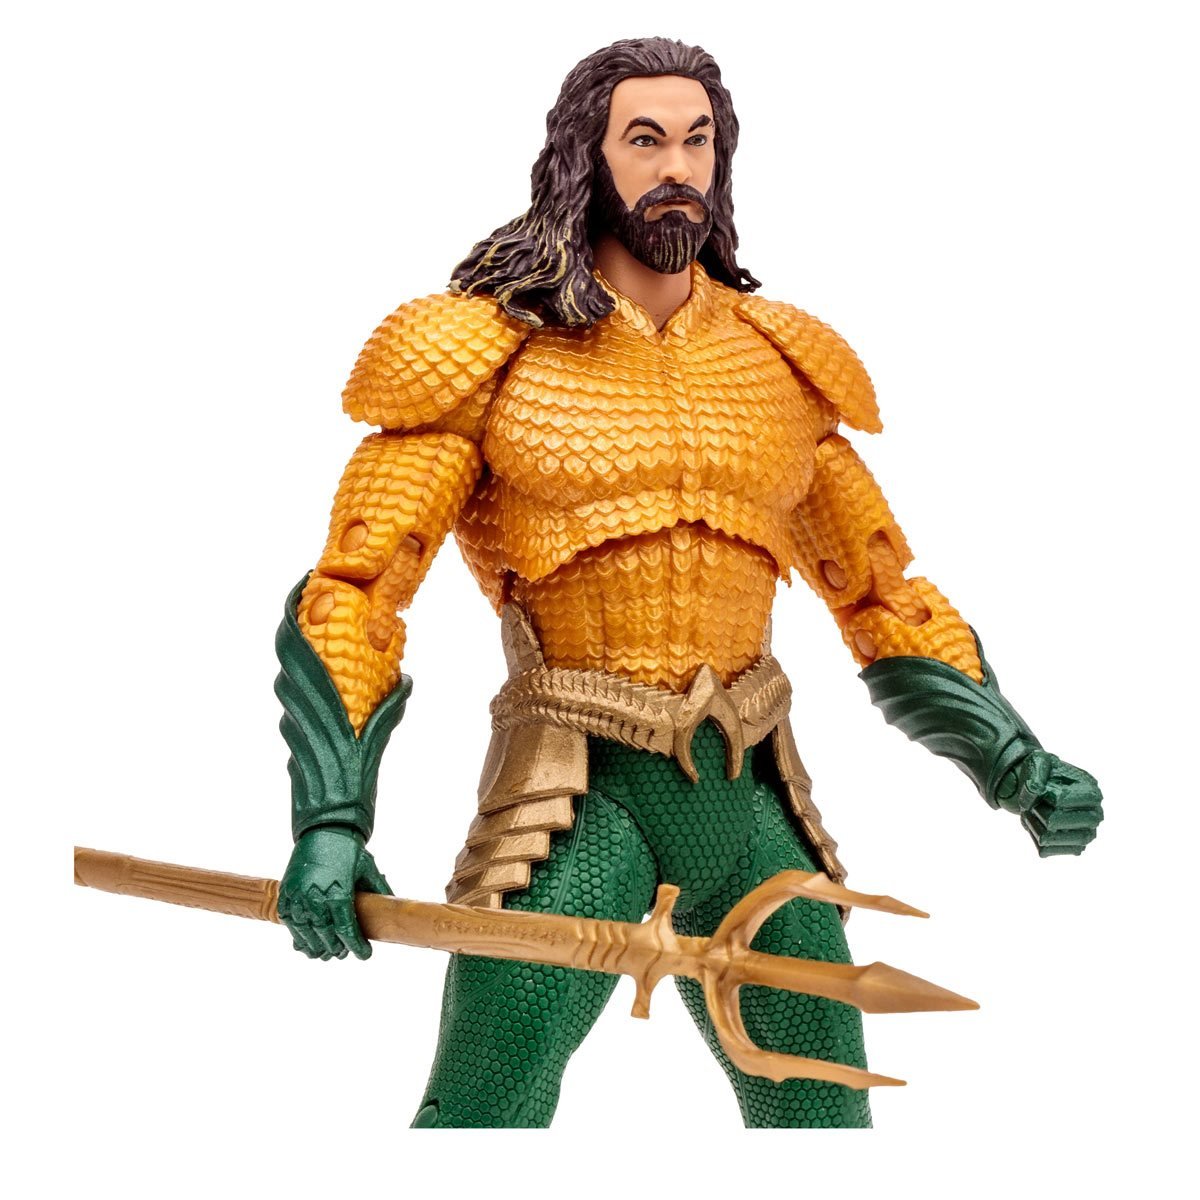 Super7 DC Multiverse Aquaman and the Lost Kingdom Movie Aquaman 7-Inch Scale Action Figure